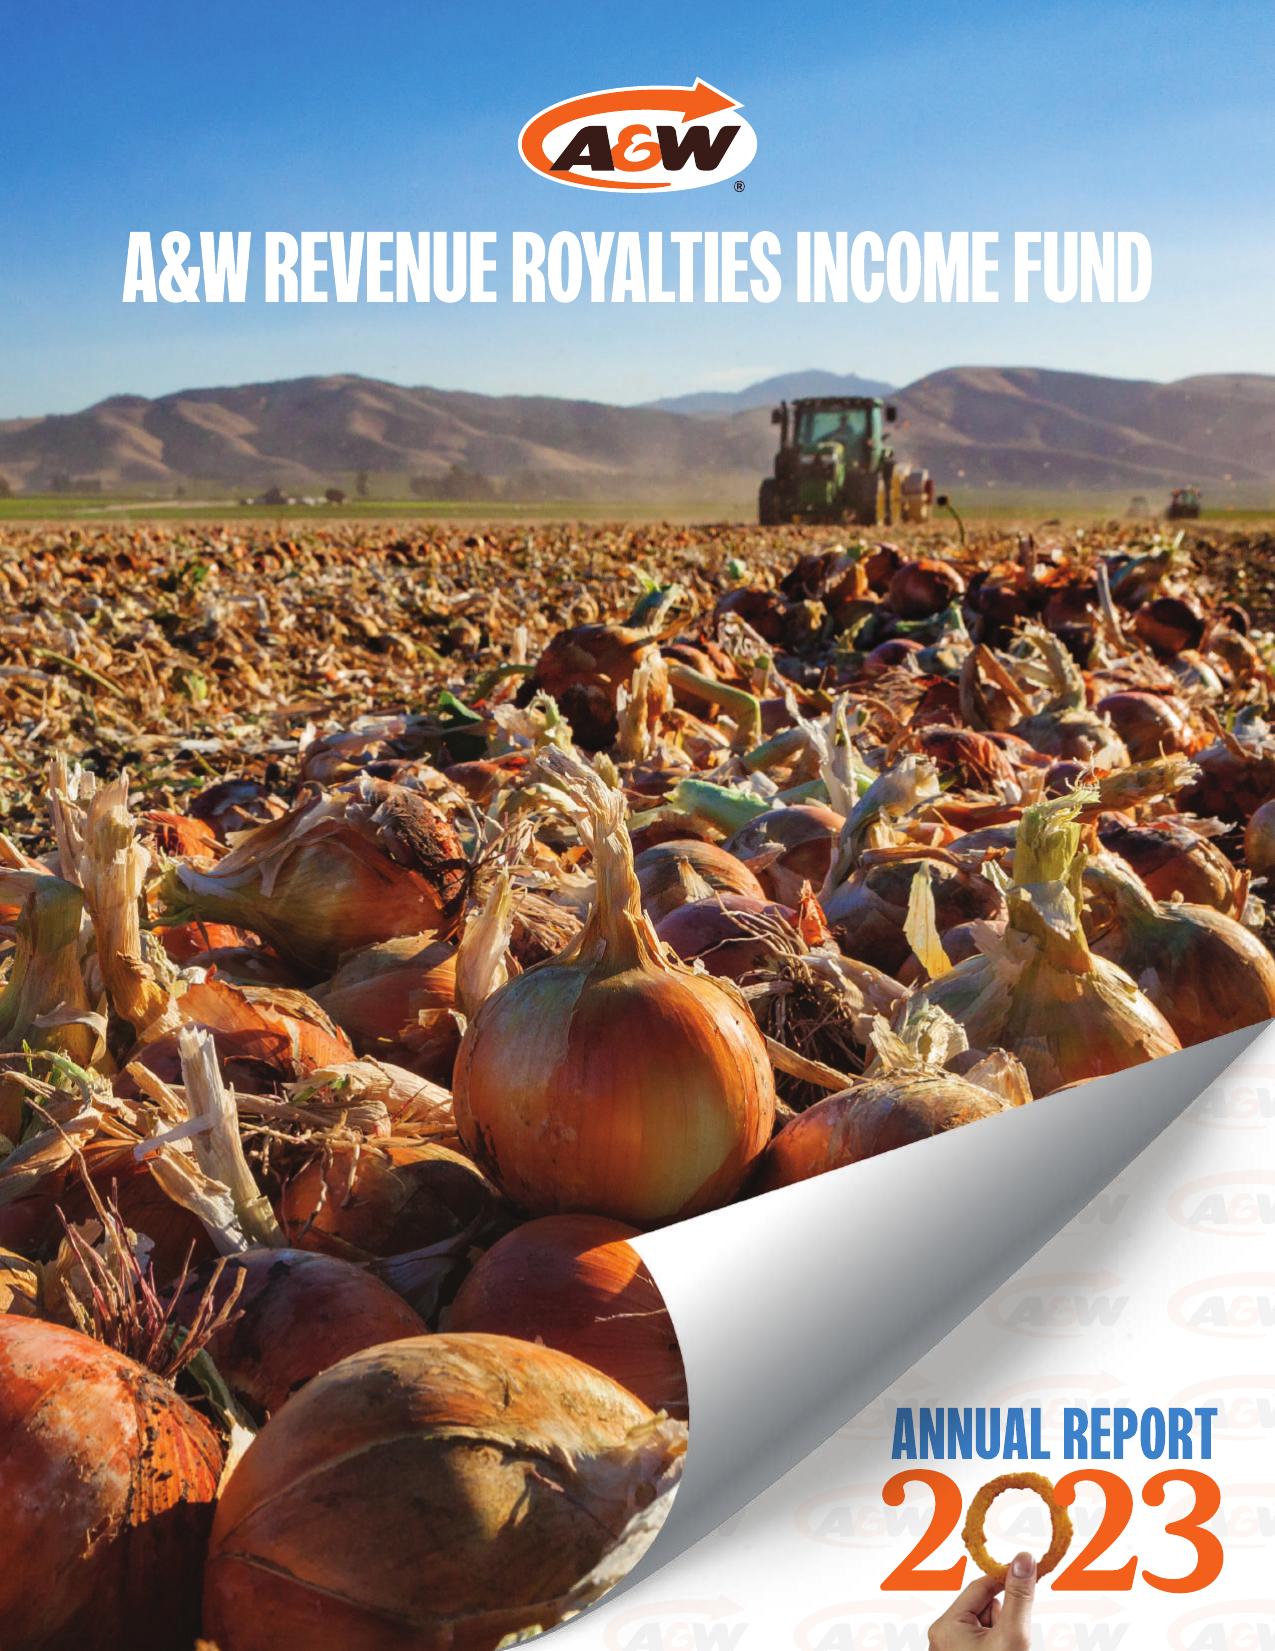 AWINCOMEFUND 2023 Annual Report